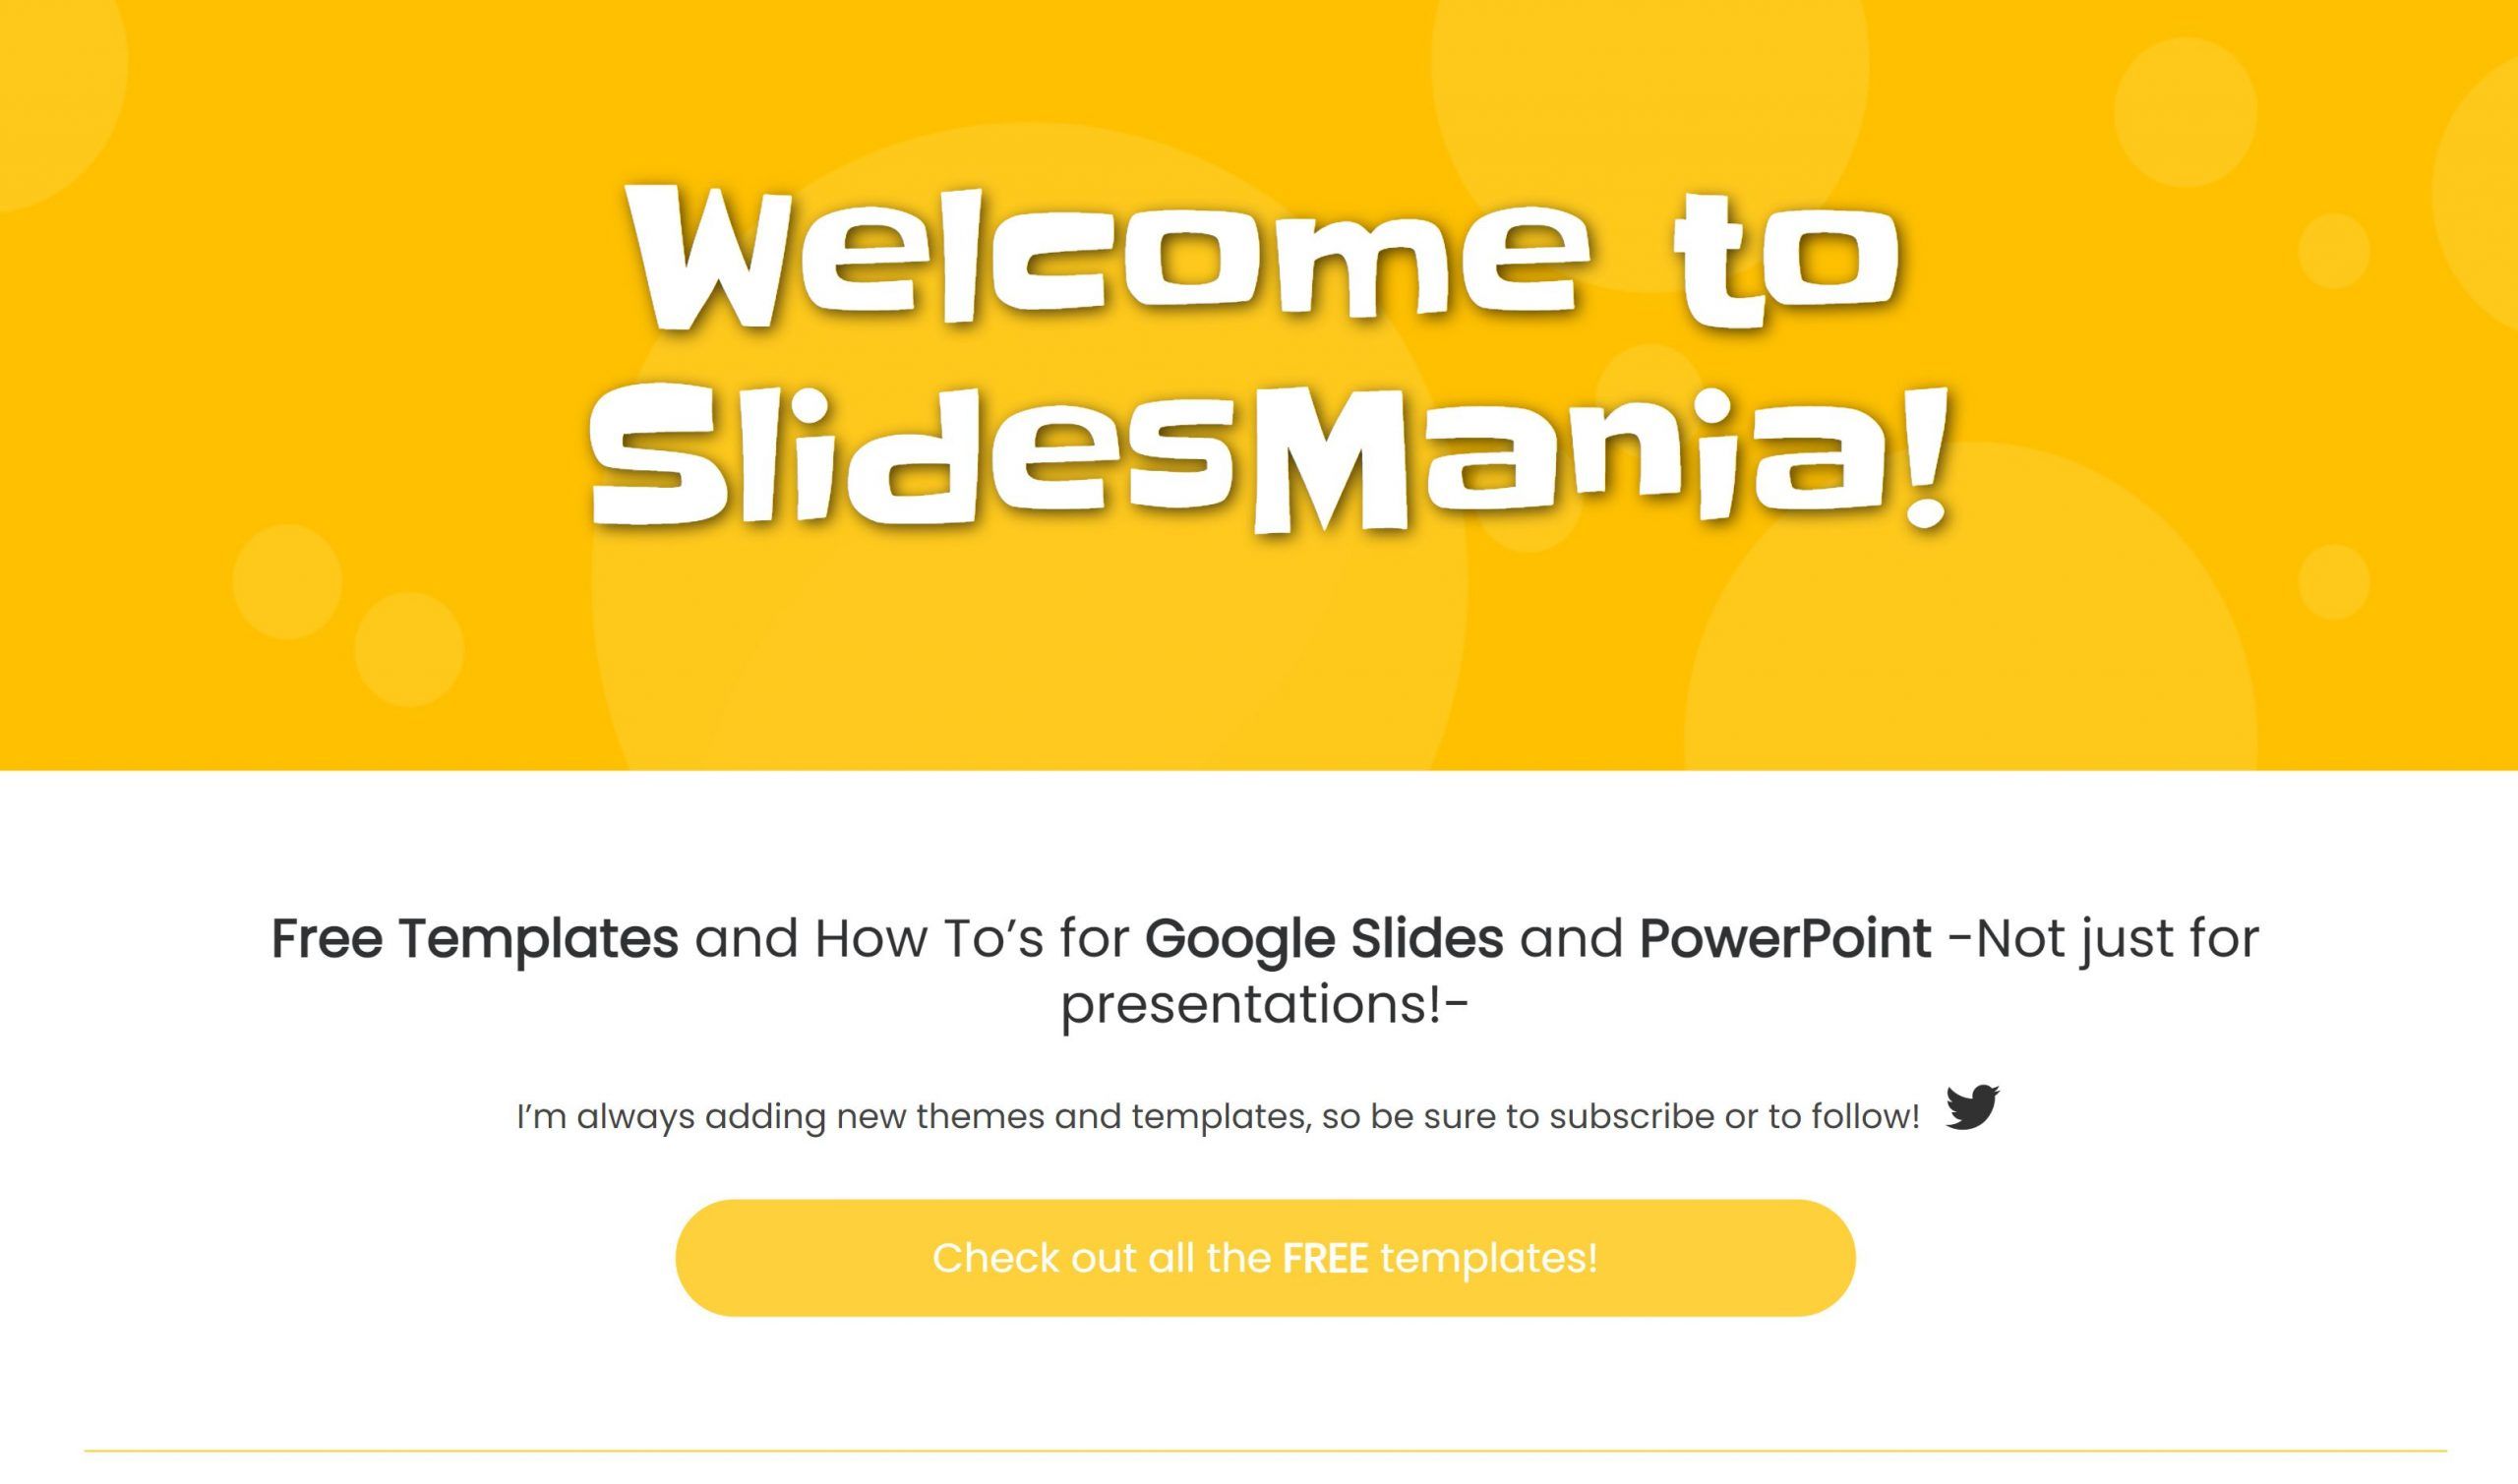 Free Powerpoint Templates And Google Slides Themes For Presentations And More Slidesmania